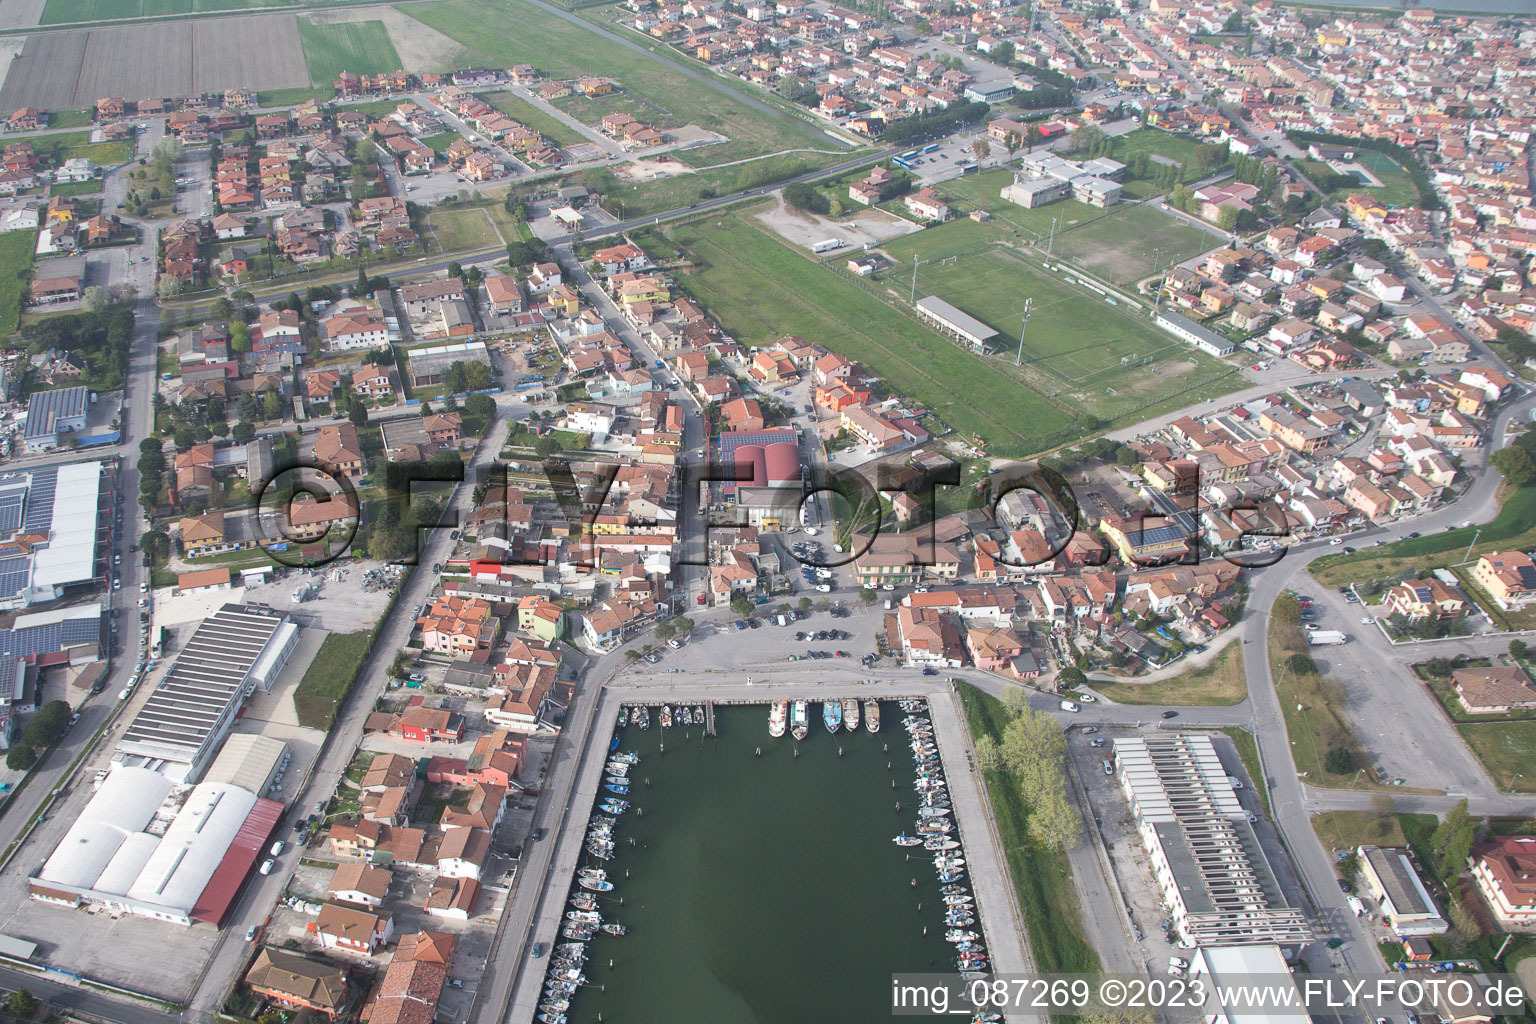 Pleasure boat marina with docks and moorings on the shore area der Adria in Goro in Emilia-Romagna, Italy seen from above